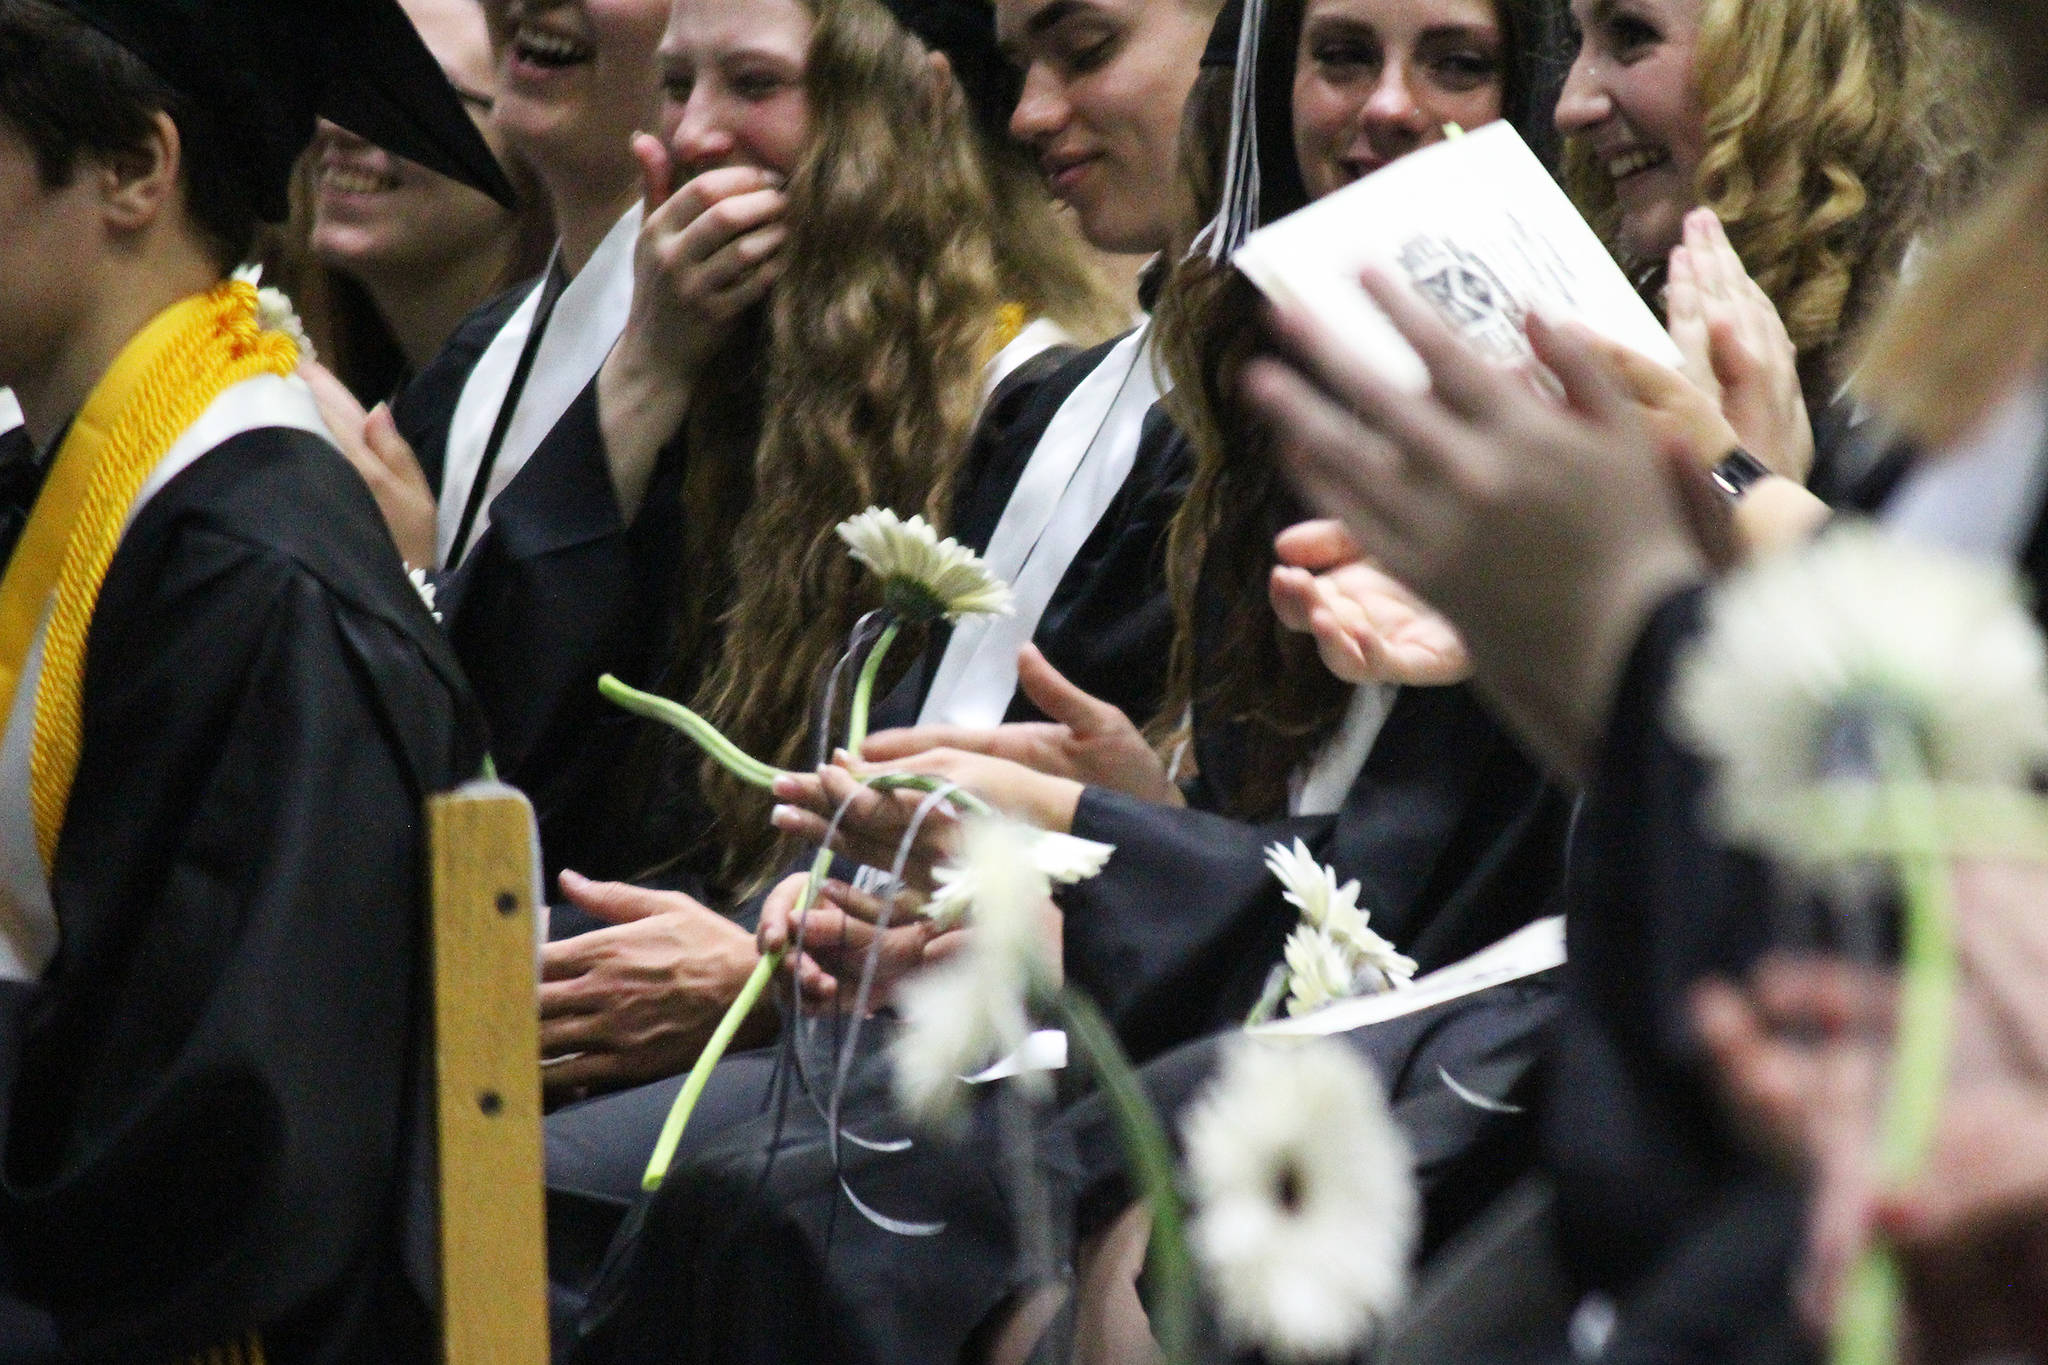 Soon-to-be graduates of Nikiski Middle-High School laugh and cheer during their ceremony Tuesday, May 23, 2017 at the school’s gymnasium in Nikiski, Alaska. (Megan Pacer/Peninsula Clarion)